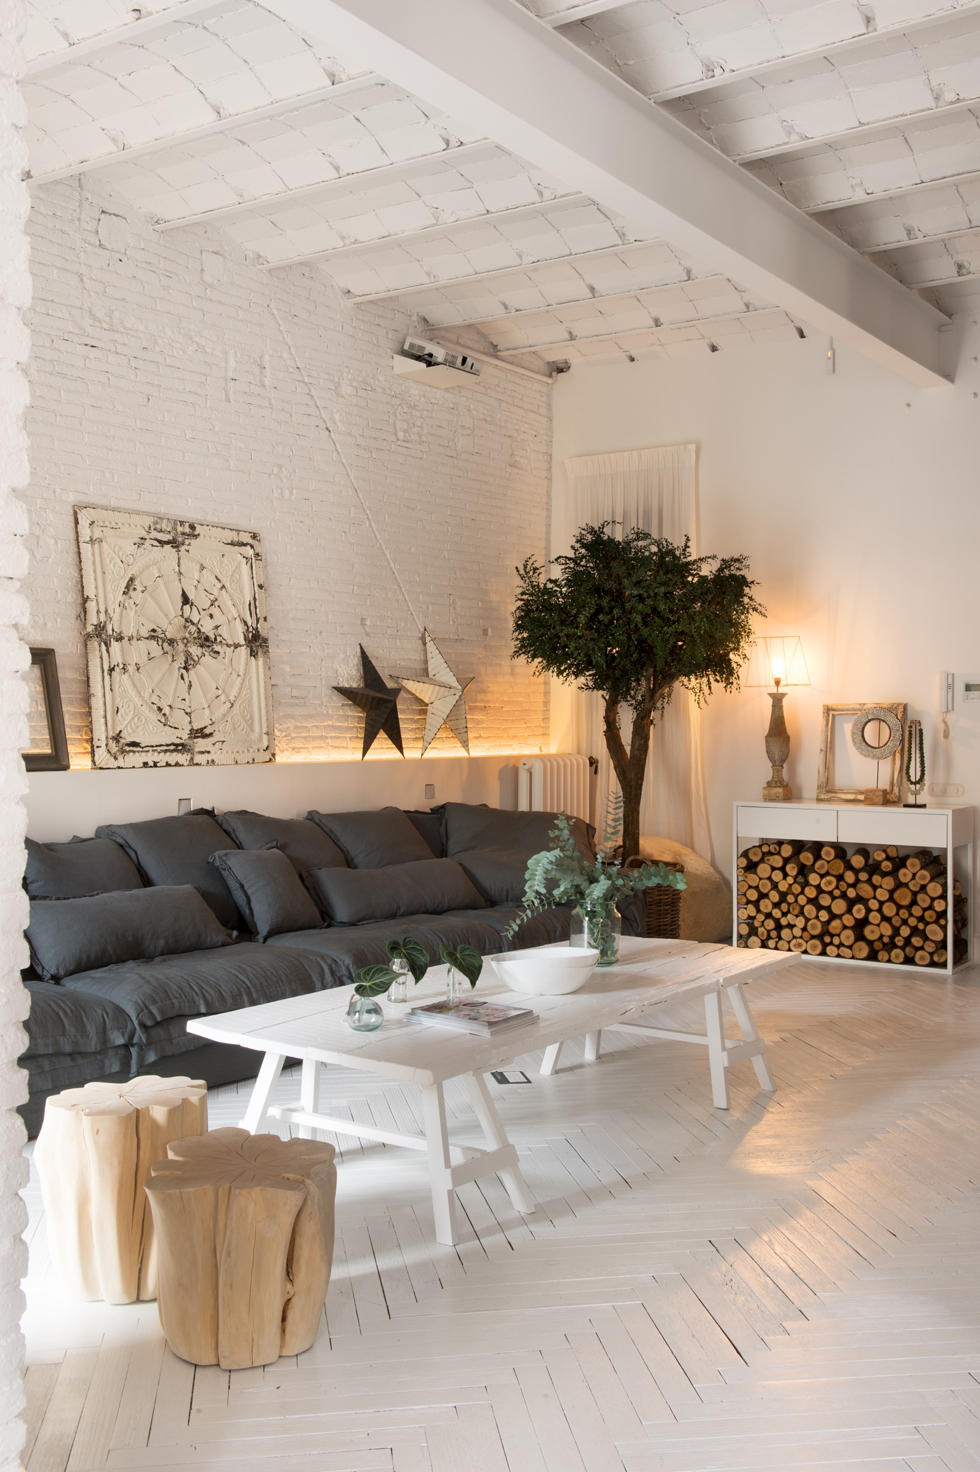 Cozy living room interior with white brick walls and rustic decor.